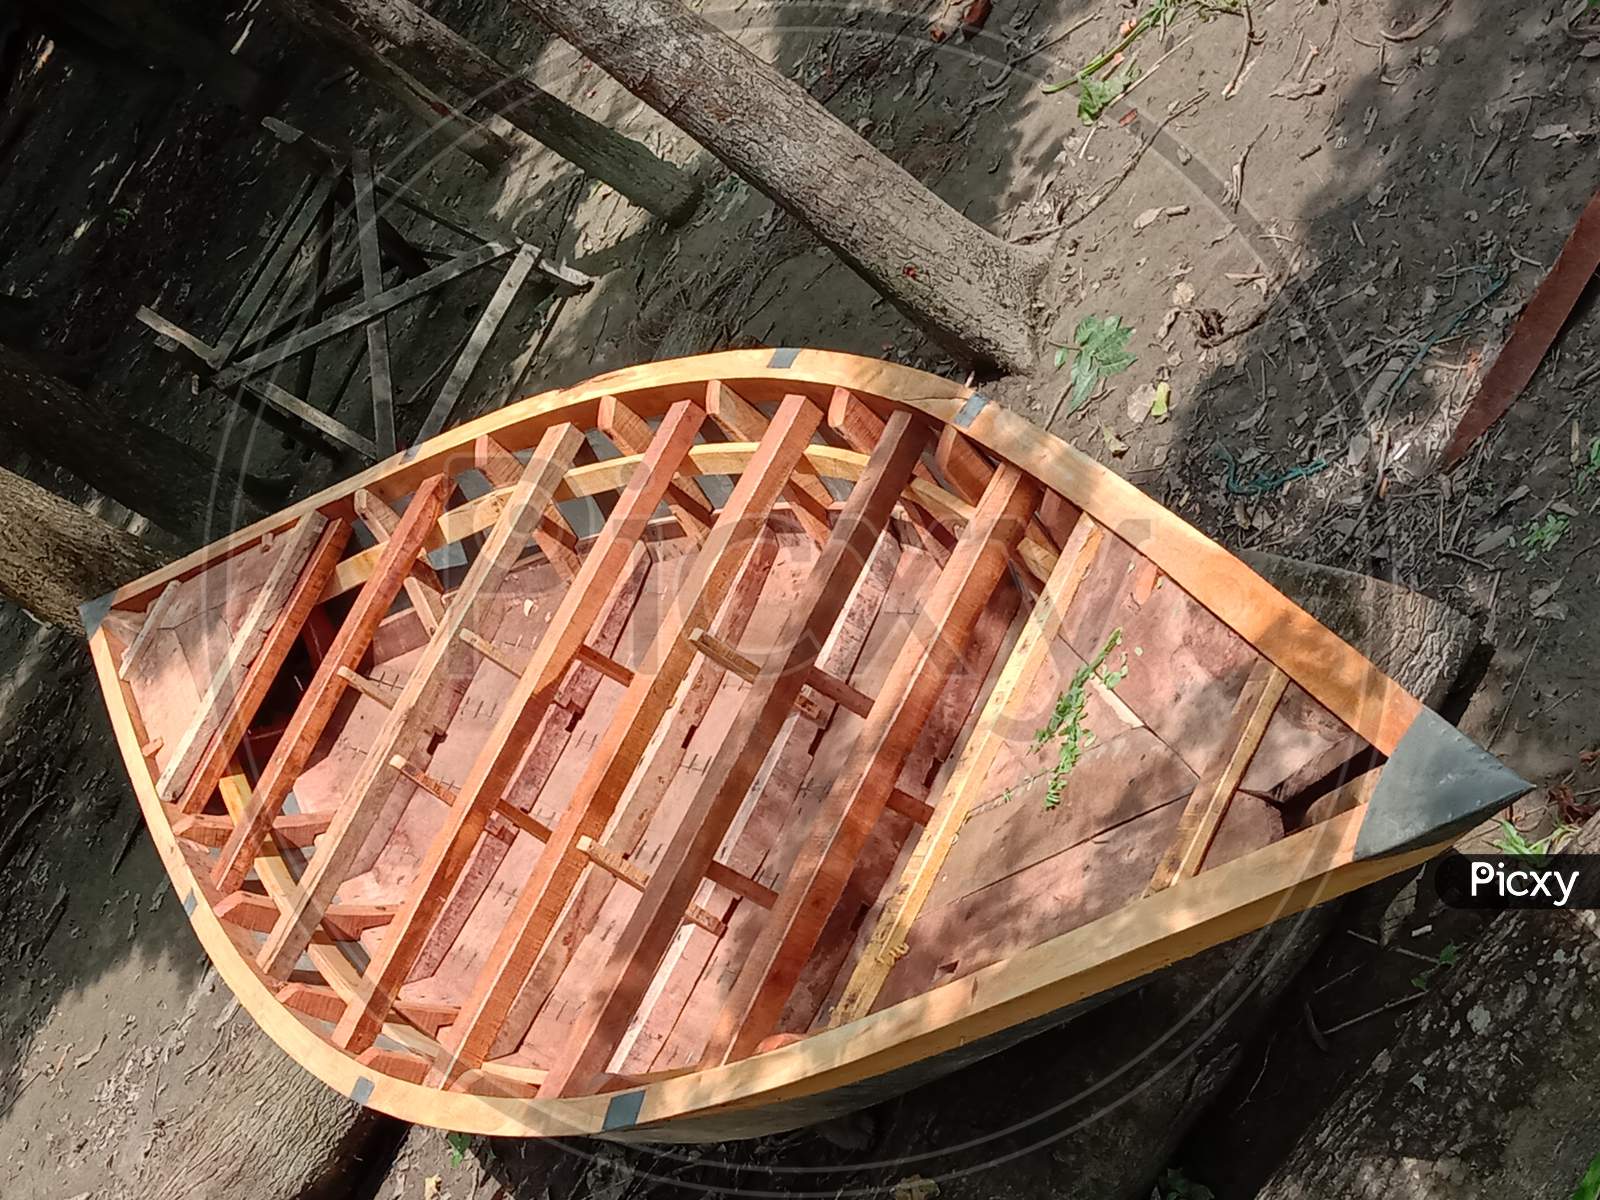 Wooden Boat Close-Up On The Ground